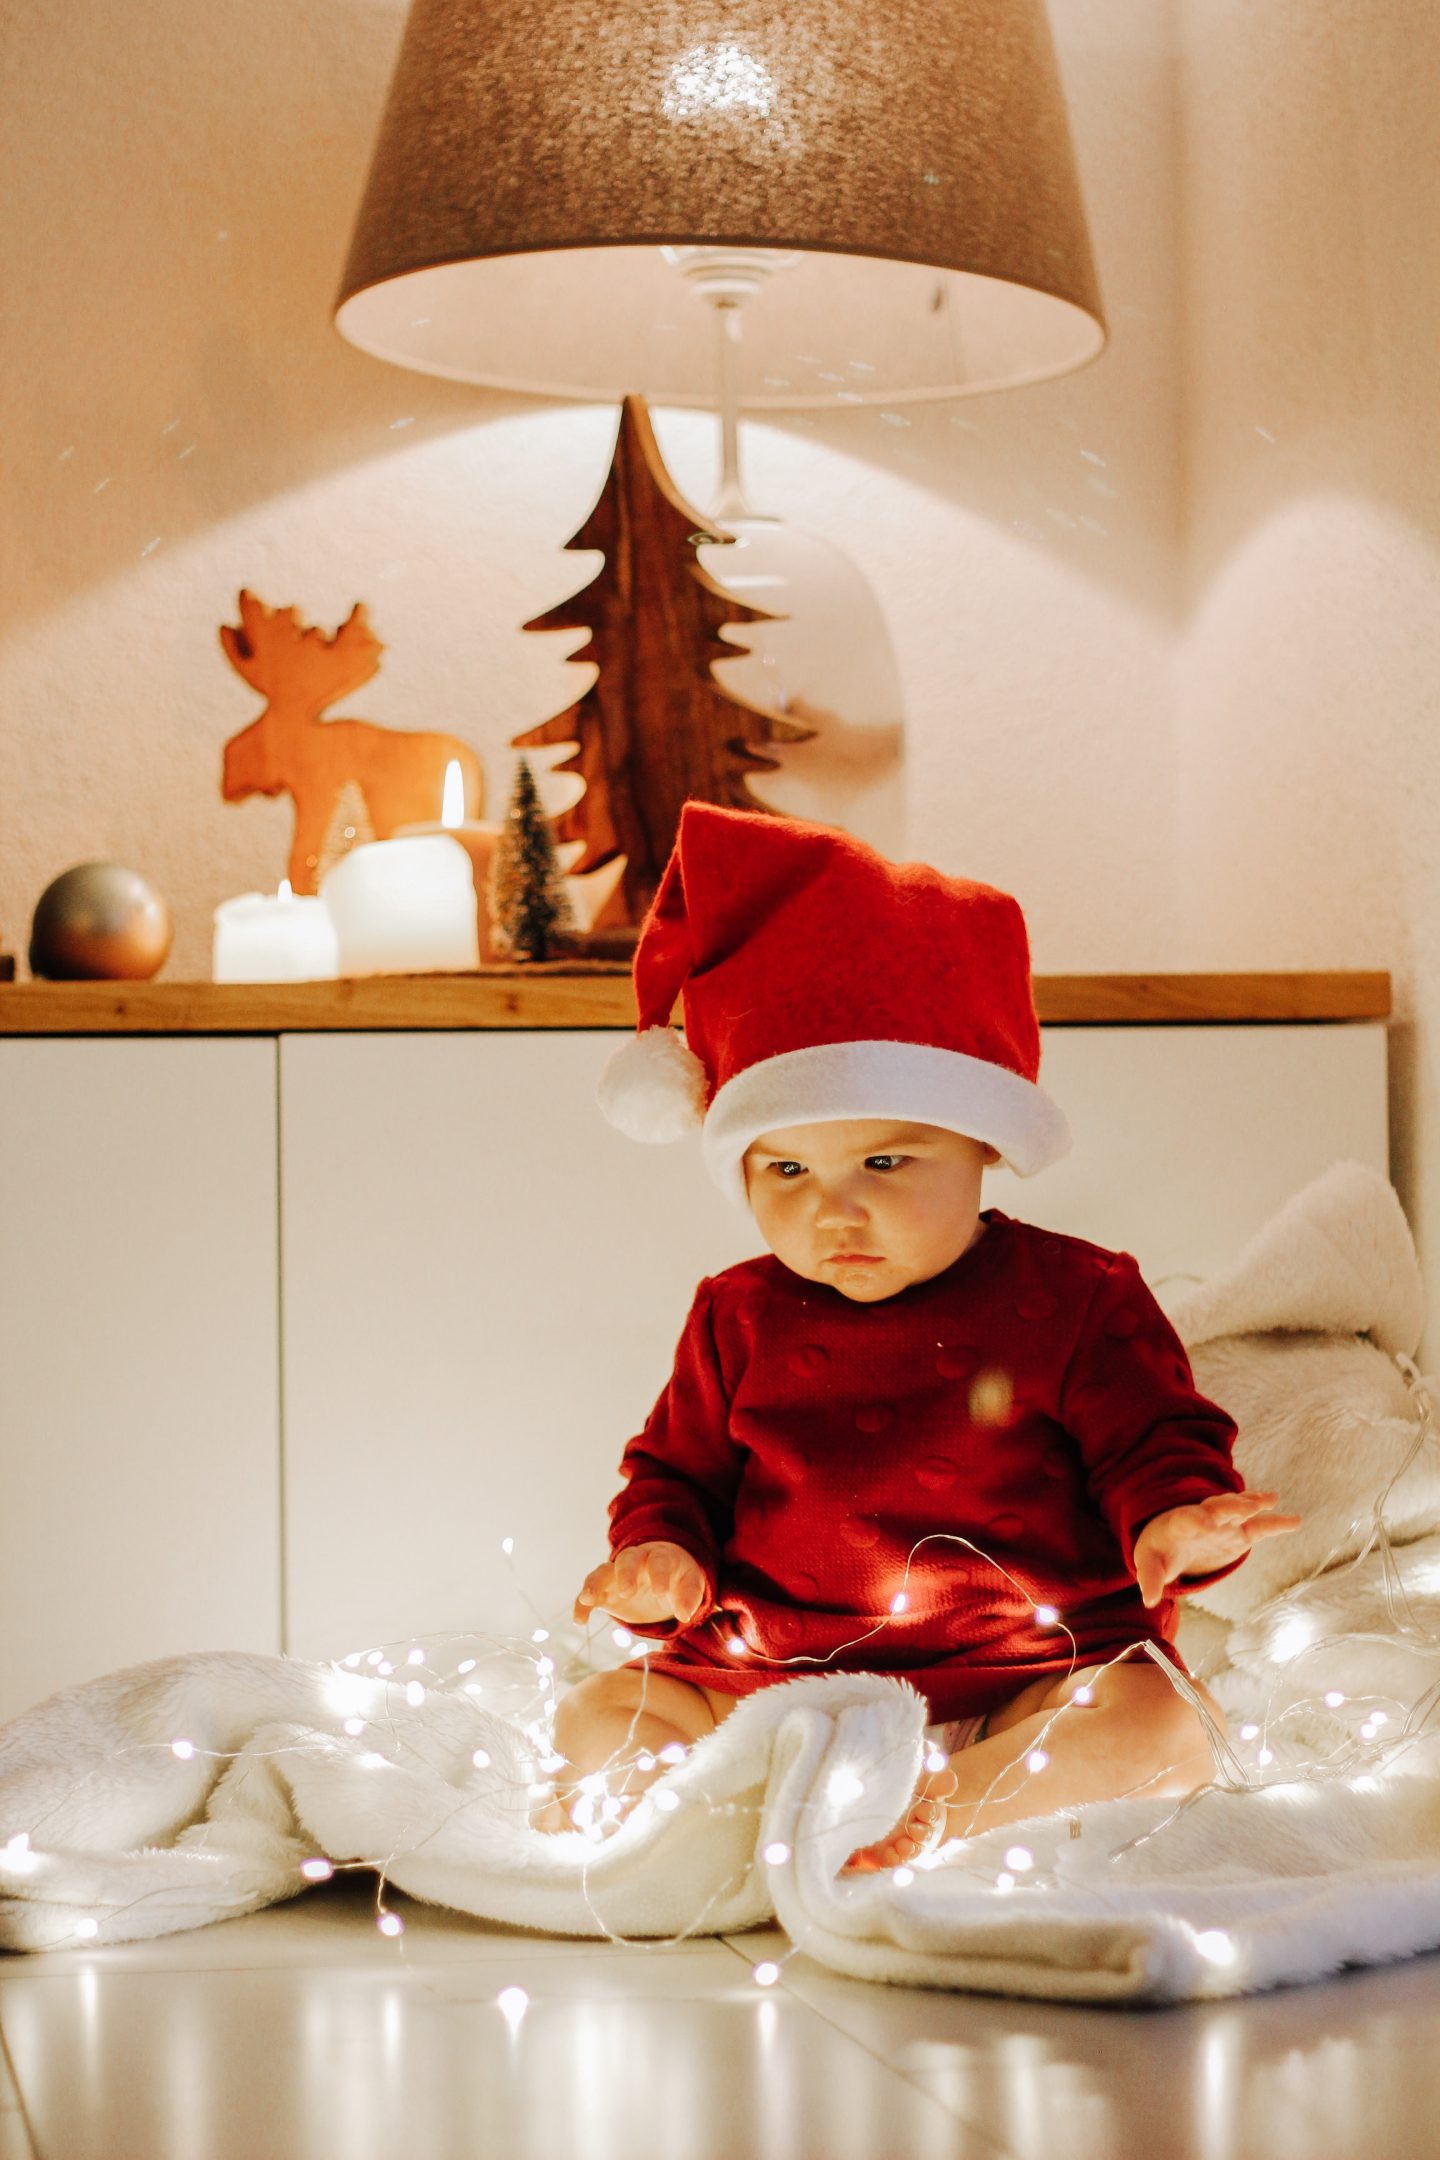 A baby wearing a Santa hat sitting on a cozy blanket looking at a string of beautiful Christmas lights laid out in front of them.